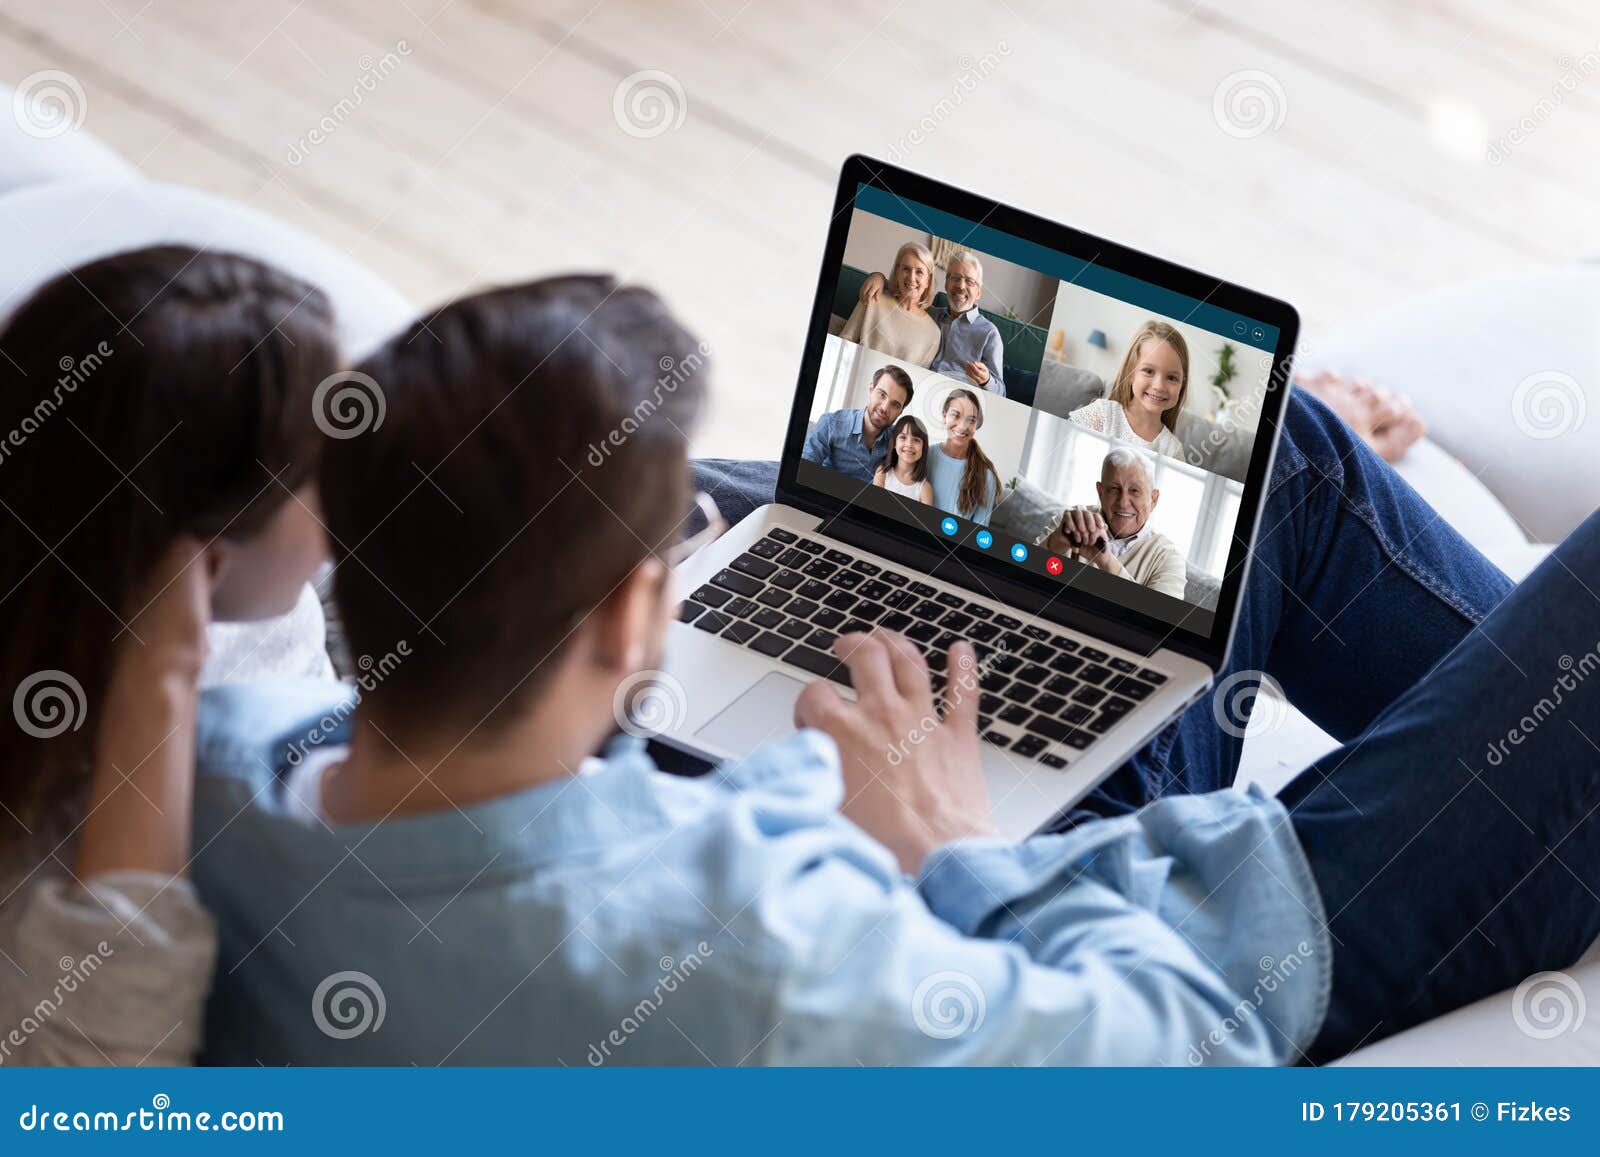 couple chatting with relatives via videoconference video call application